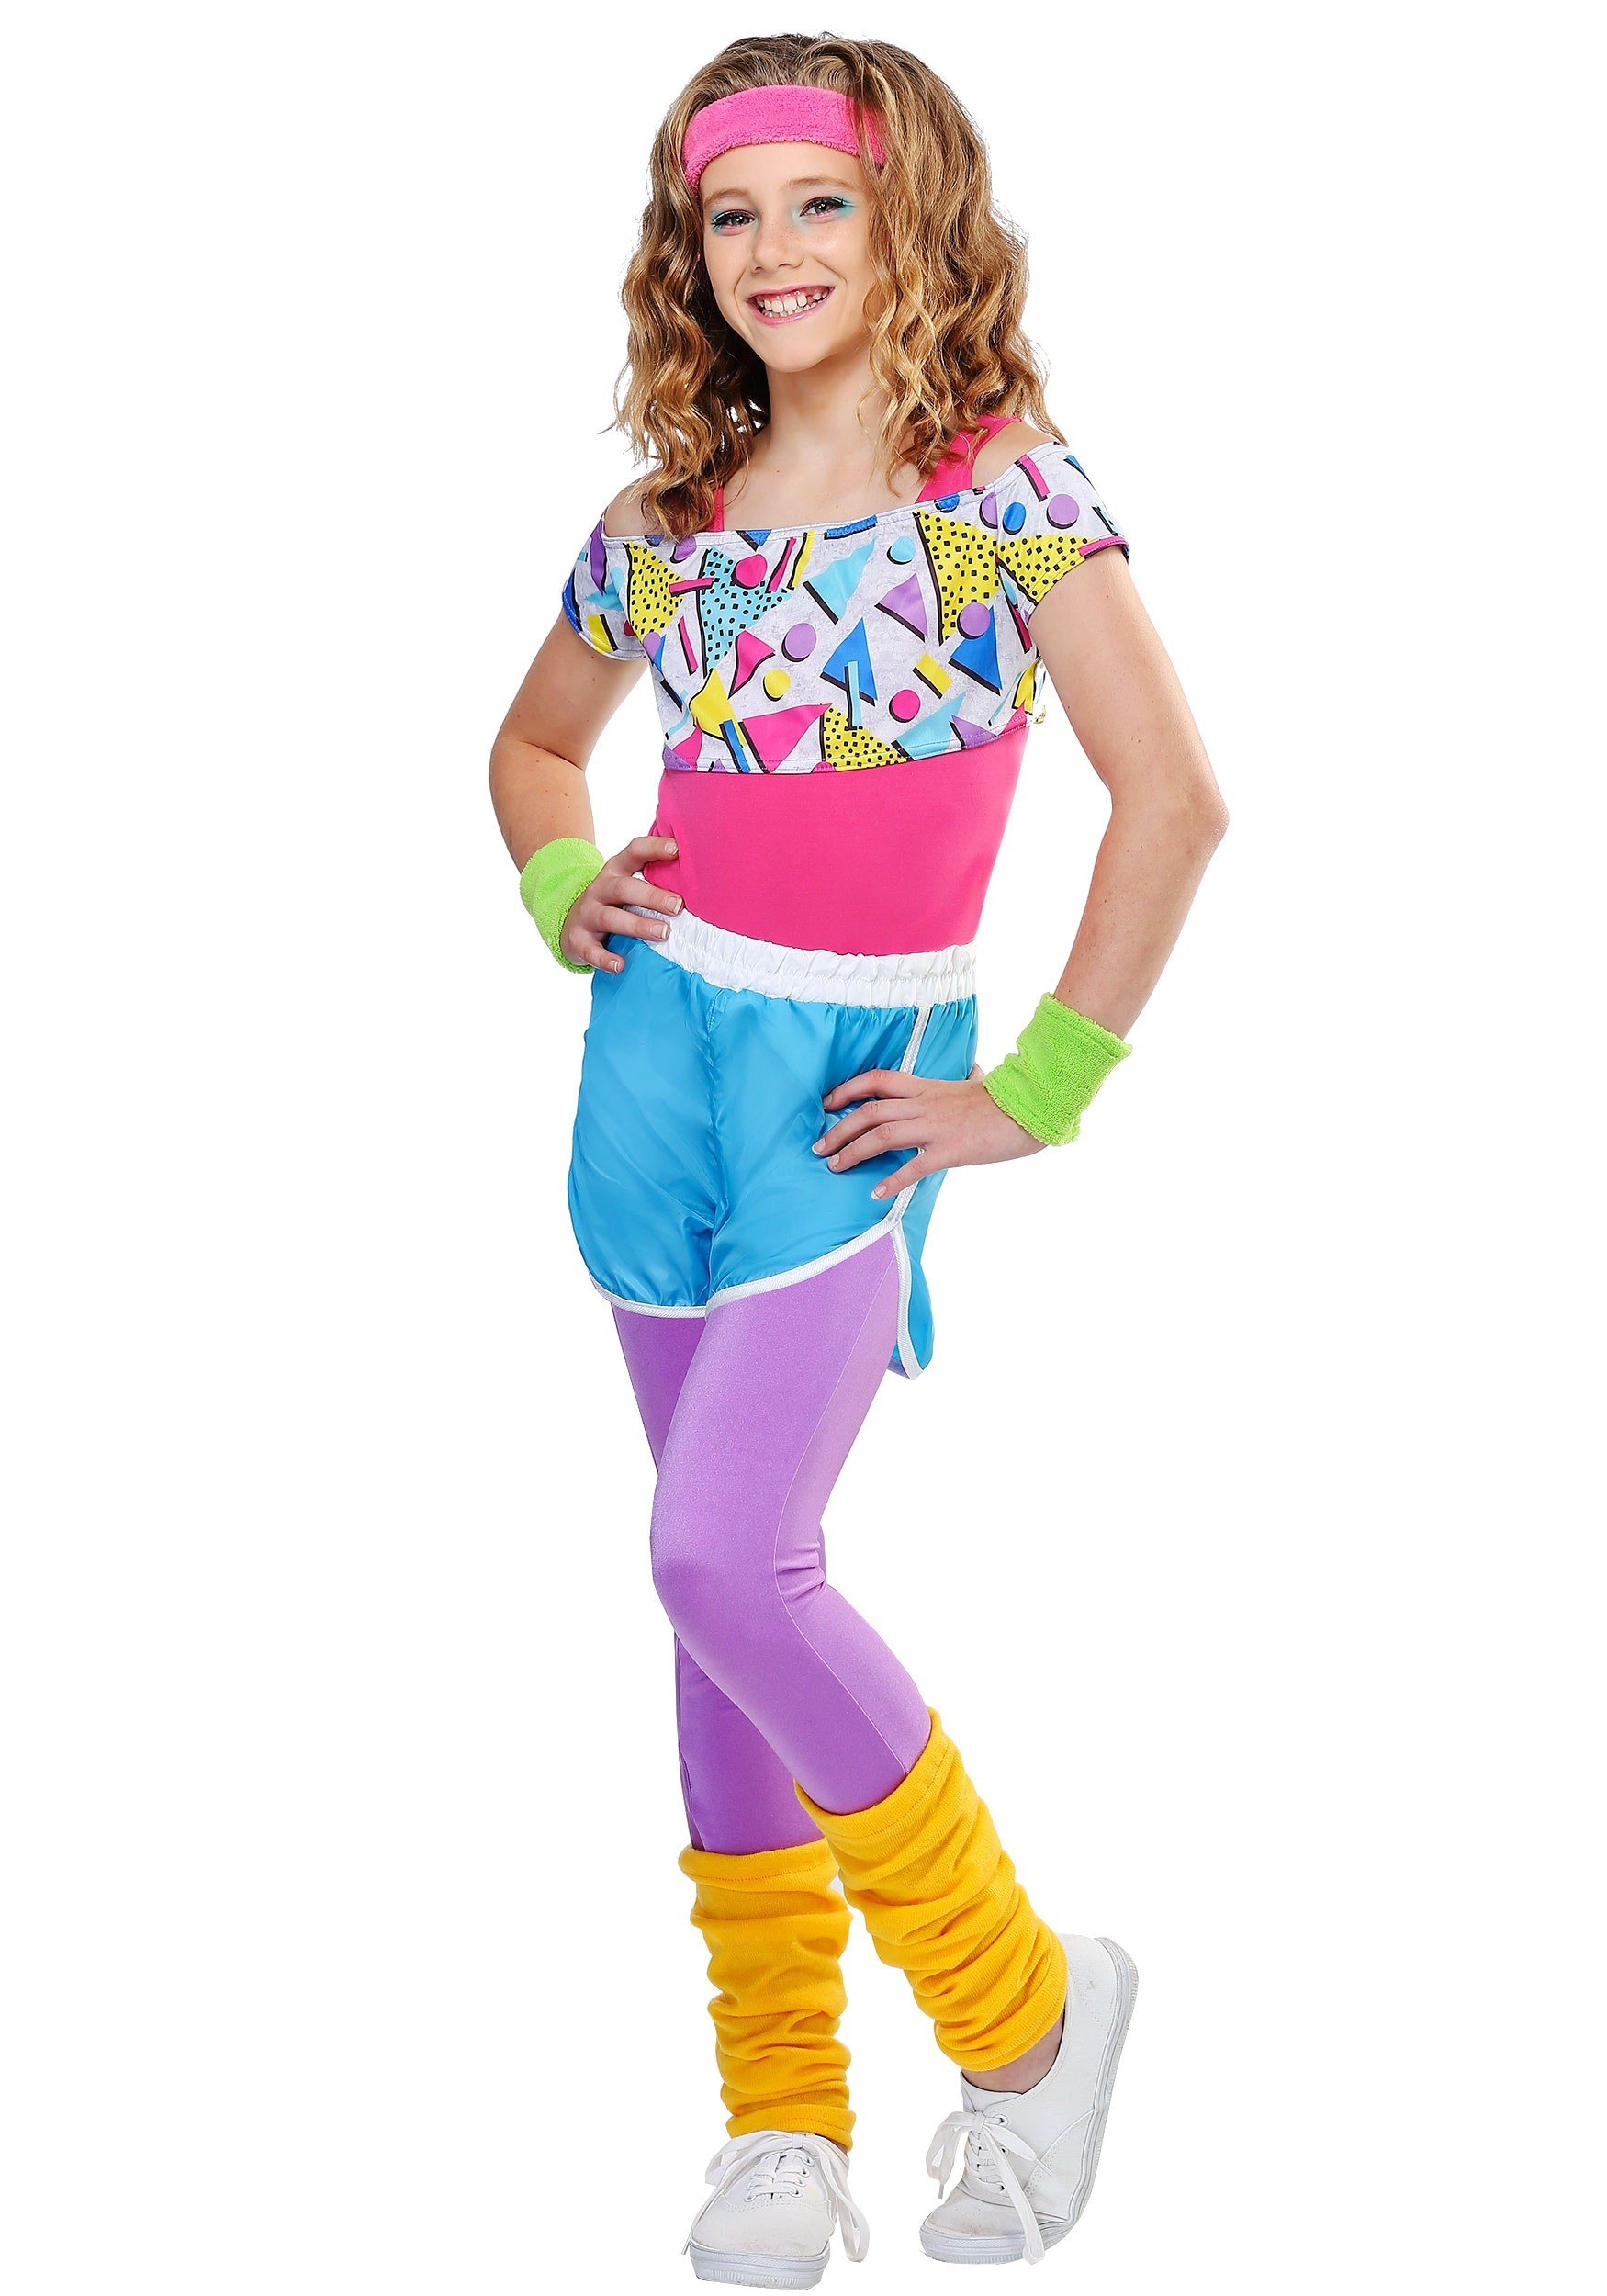 Photos - Fancy Dress Work FUN Costumes  It Out 80s Girl's Costume Pink/Purple/Blue FUN62 